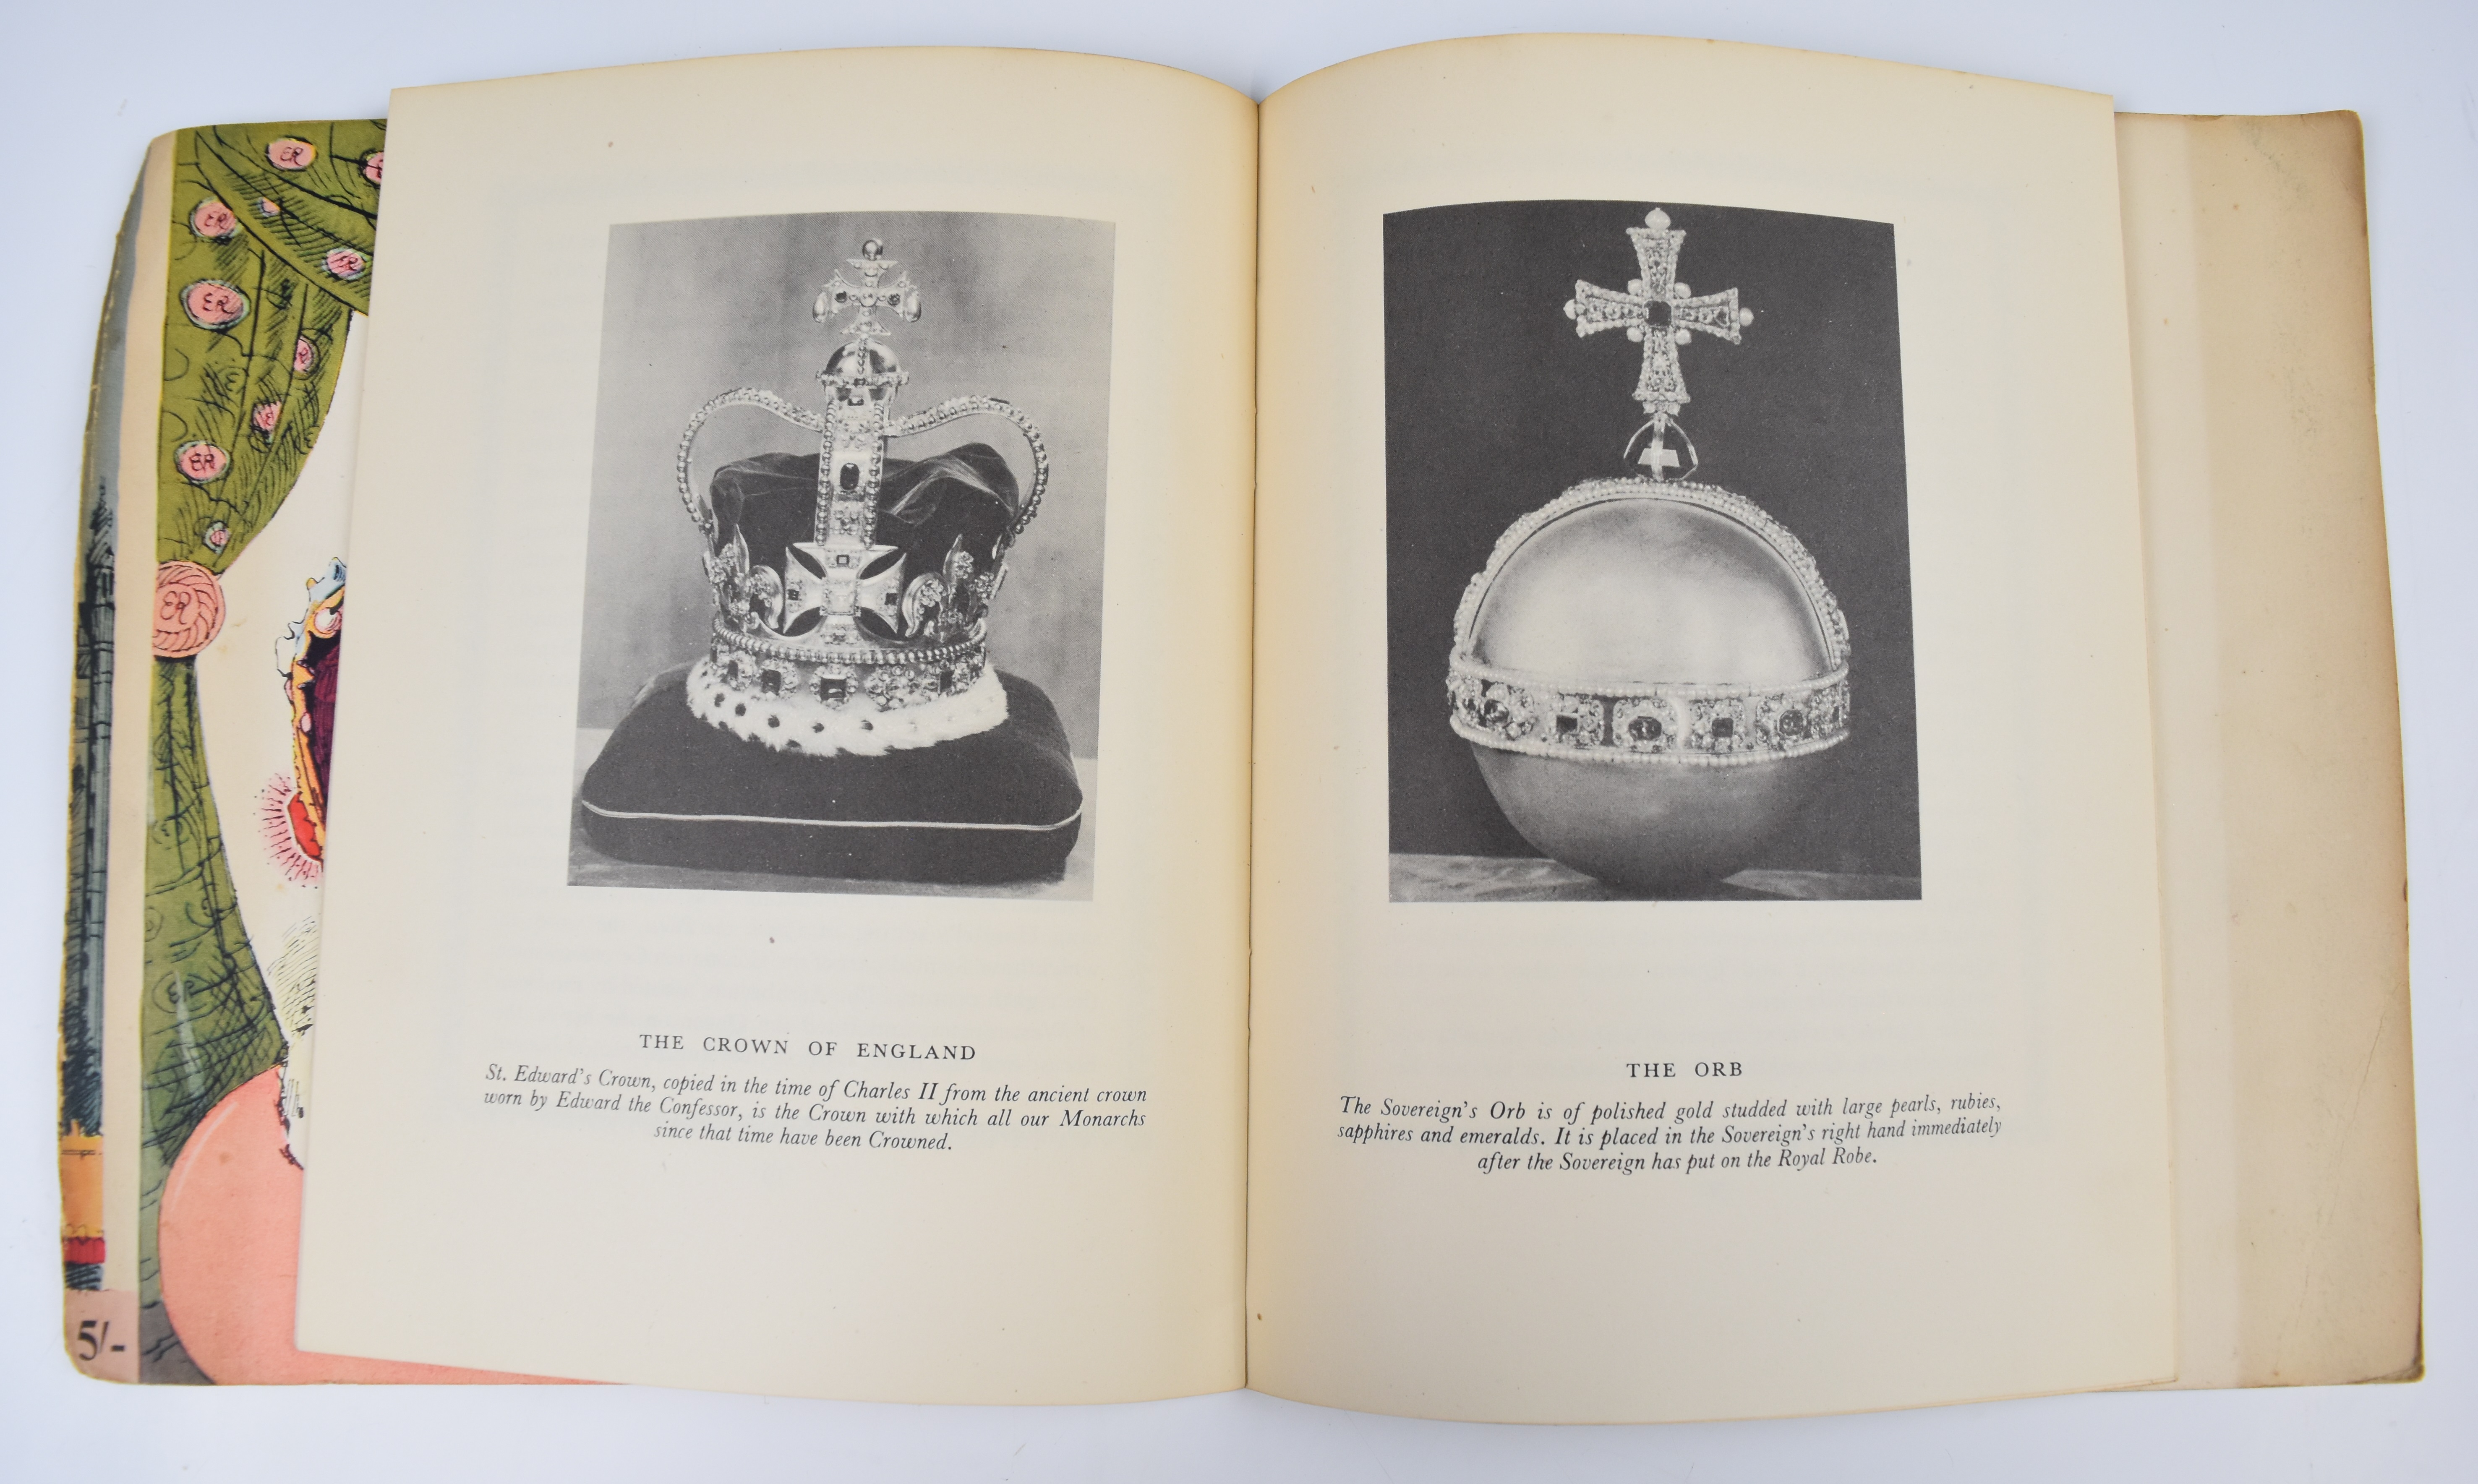 [Peep-Show] The Picture Post Coronation Peep-Show Book, Devised & Drawn by Edwin Smith with a - Image 4 of 4